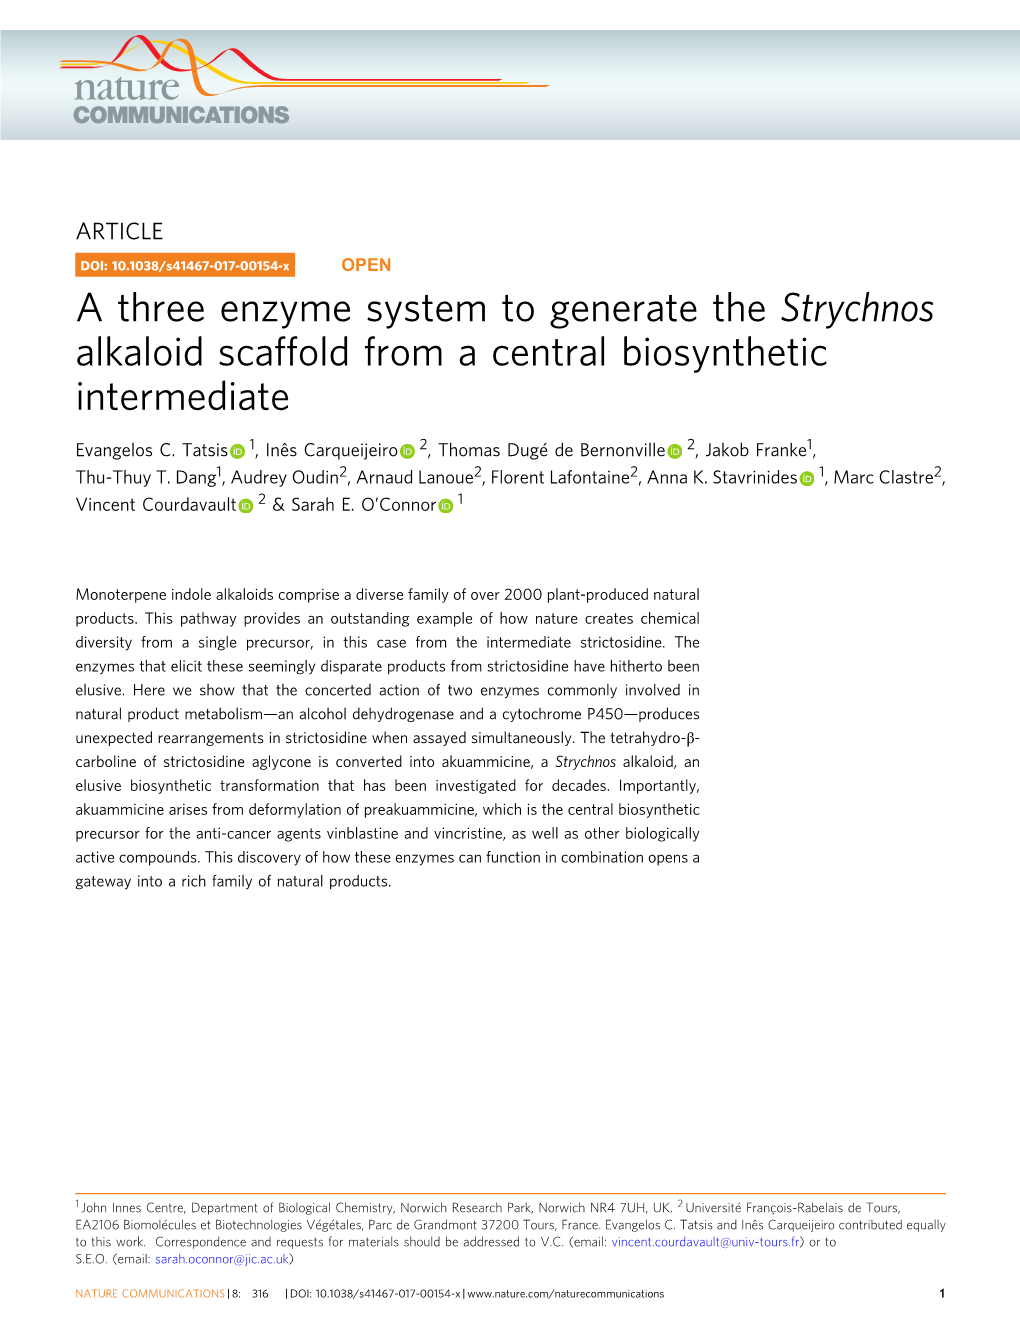 A Three Enzyme System to Generate the Strychnos Alkaloid Scaffold from a Central Biosynthetic Intermediate